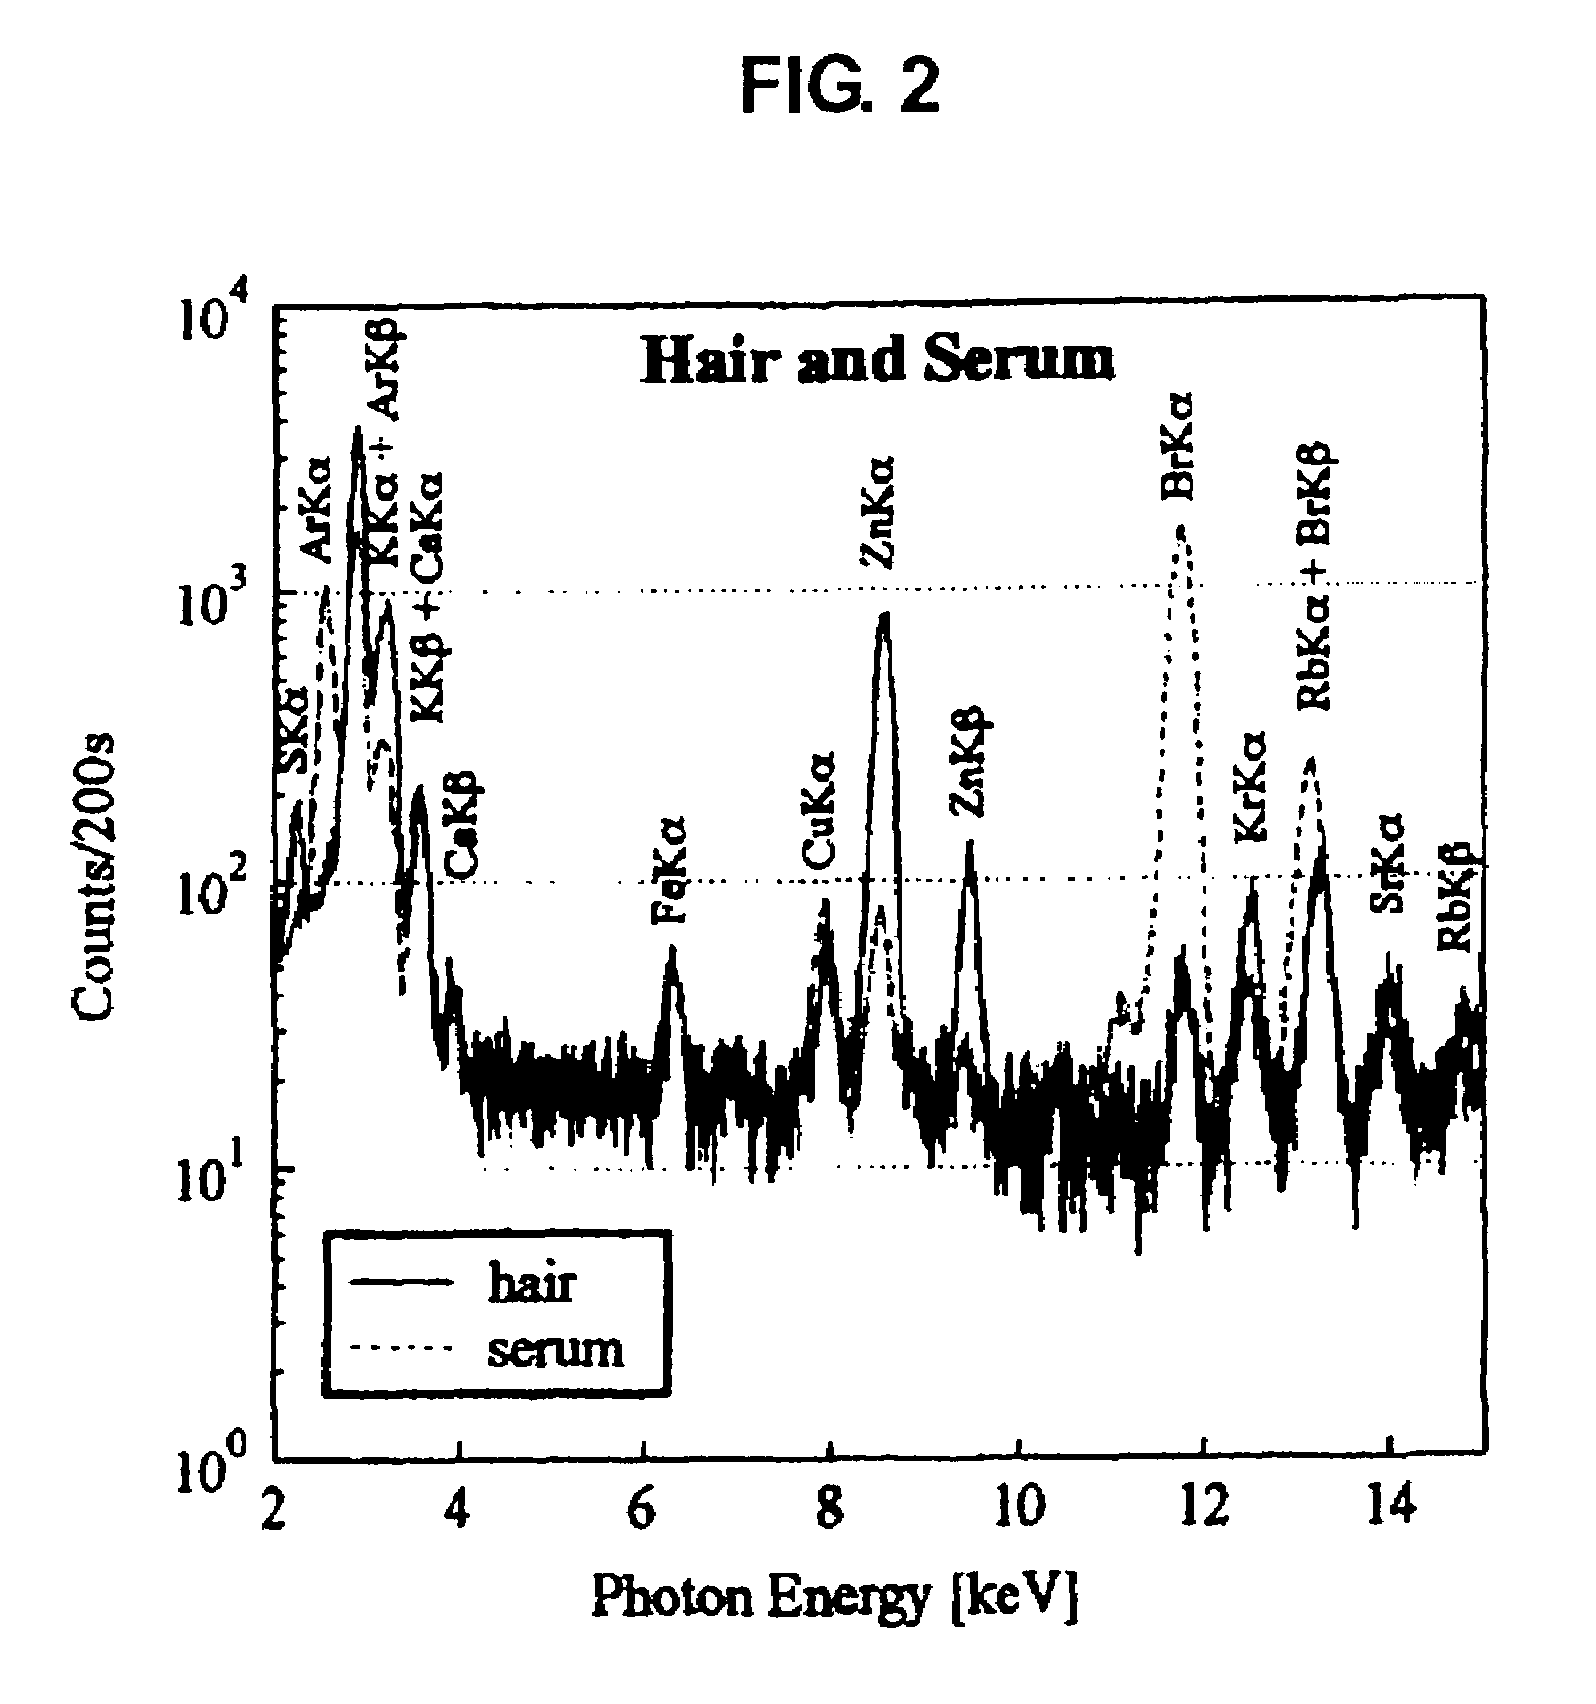 Method for evaluating physical conditions using head hair or body hair